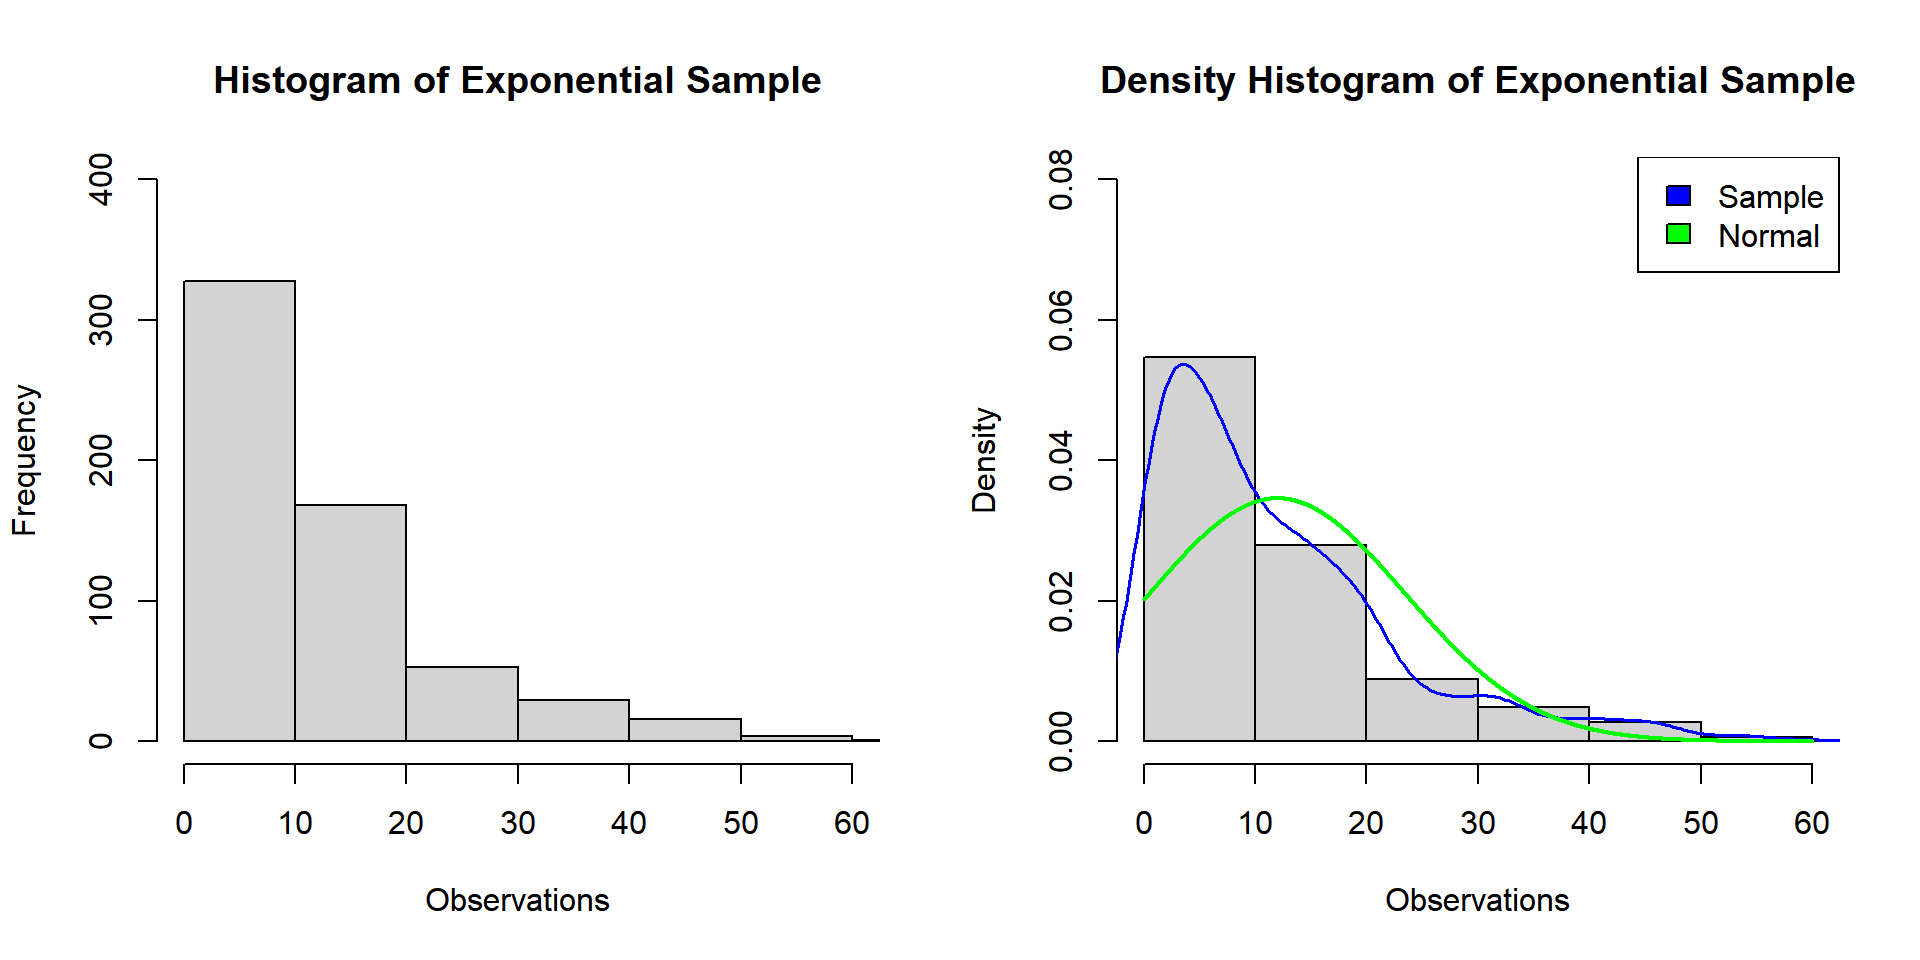 Example 2: Histogram and Density Histogram for Normality Test in R